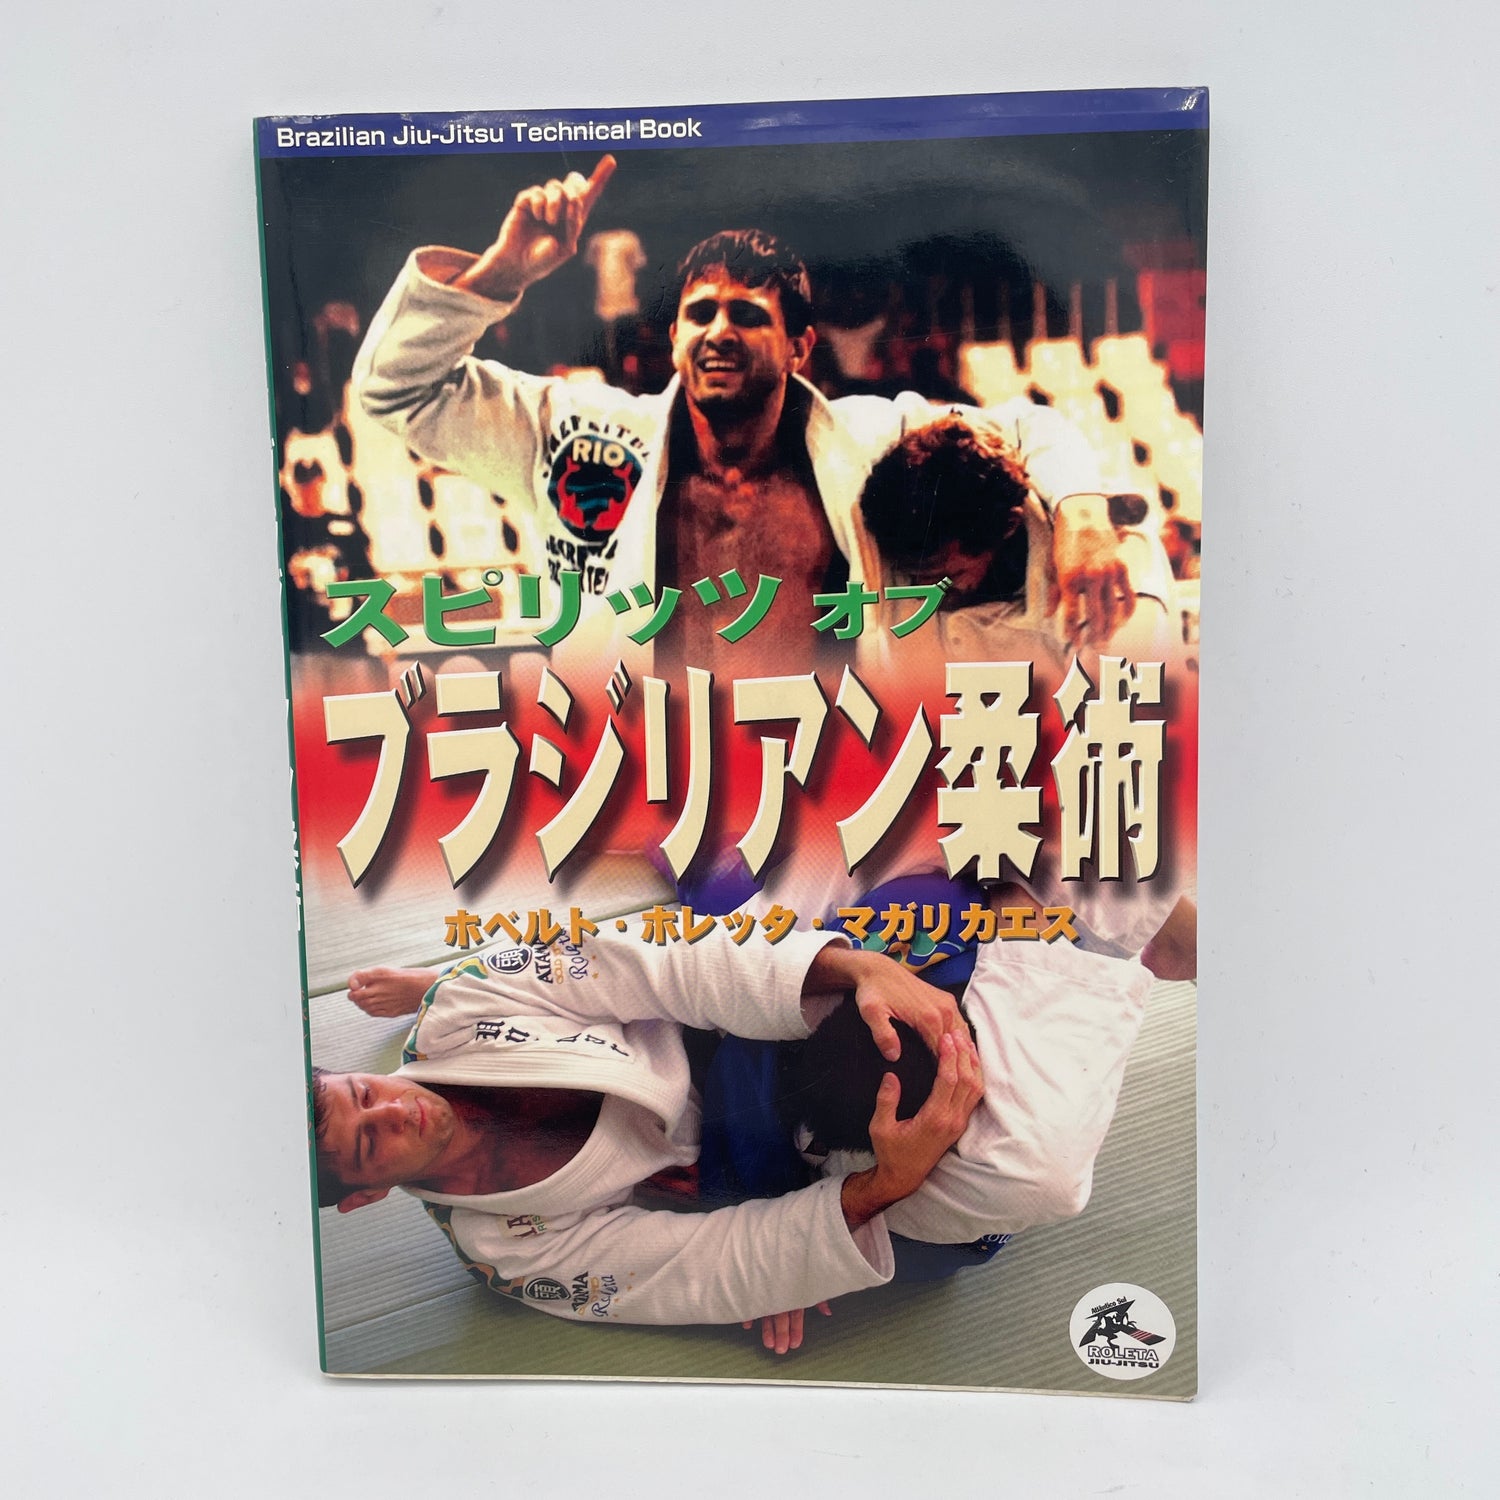 Spirit of BJJ Book By Roberto Roleta Magalhaes (Preowned)